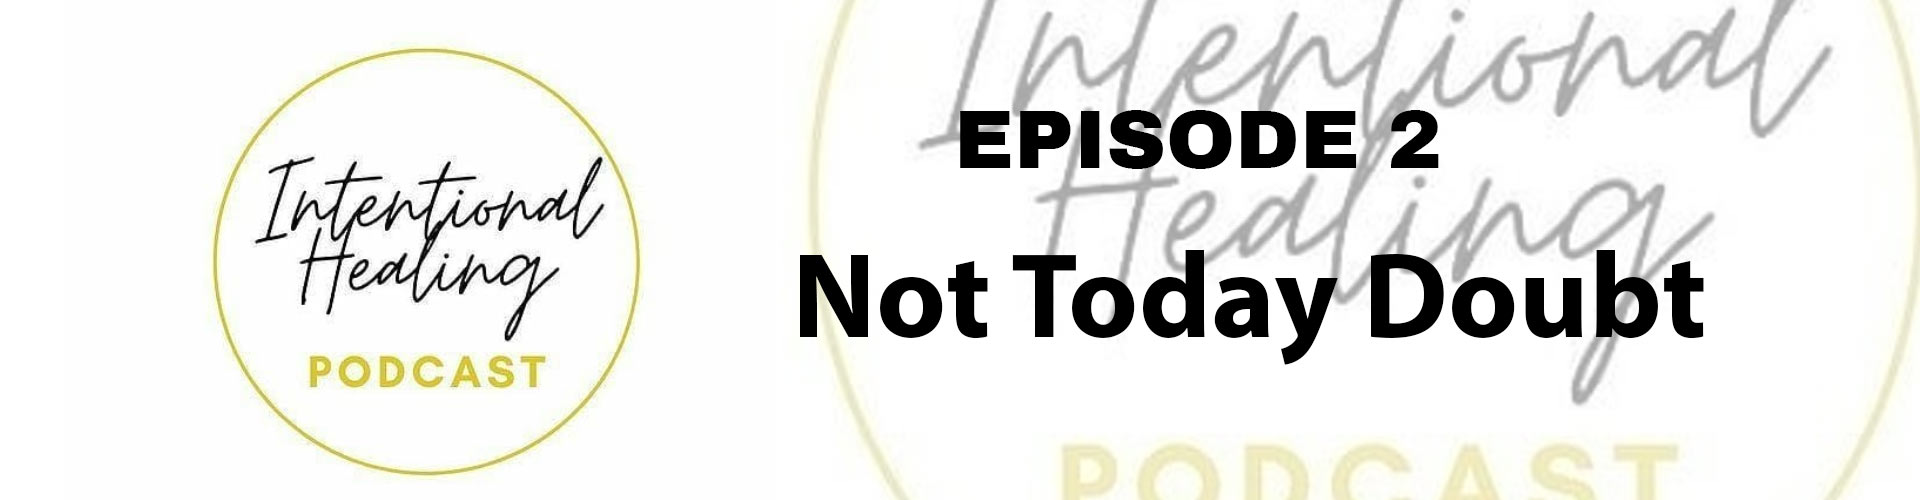 Intentional Healing Podcast - Episode 2 - Not Today Doubt